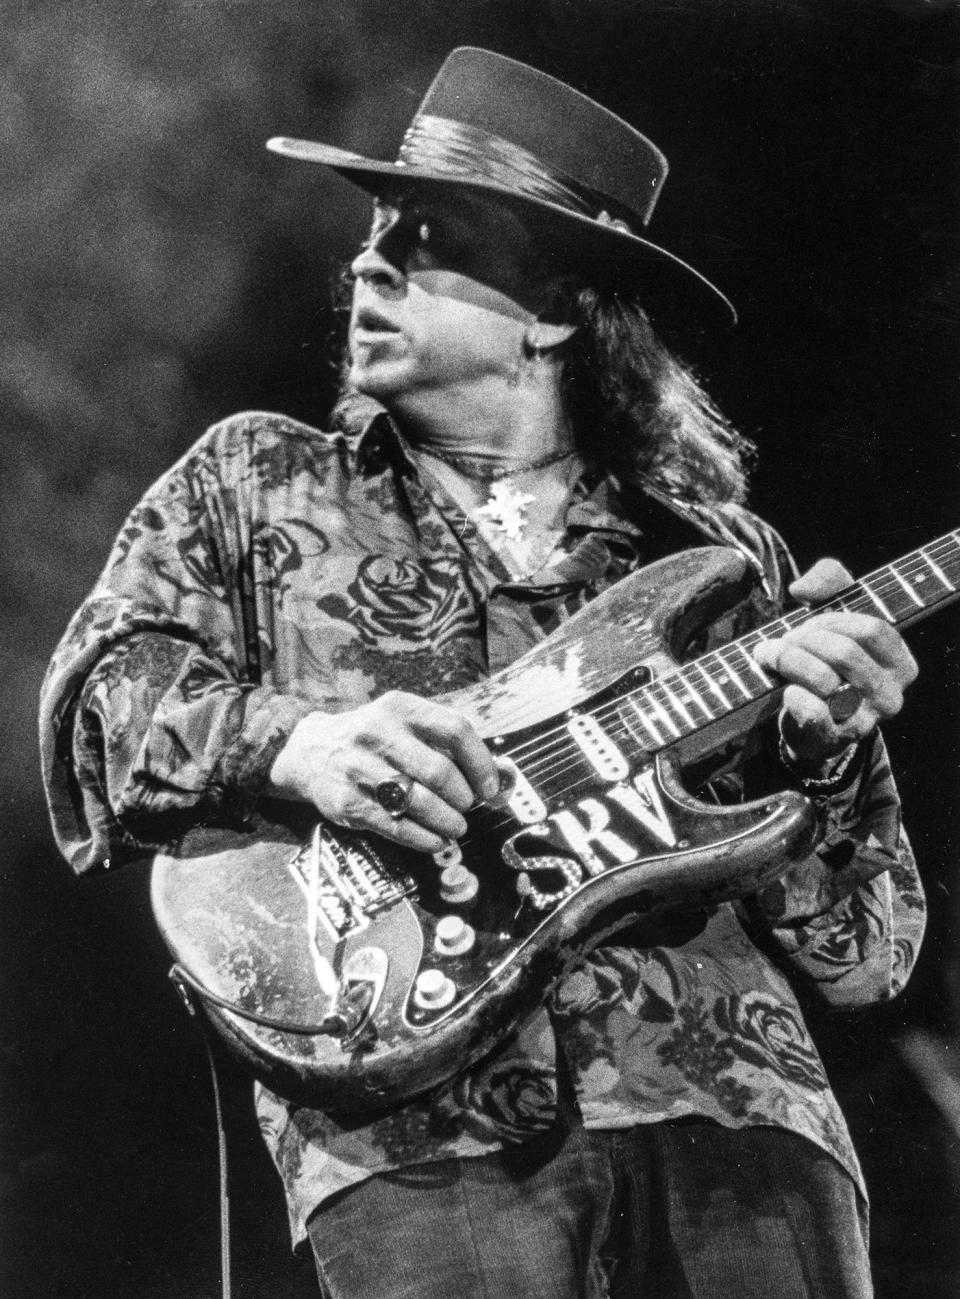 Stevie Ray Vaughan performs at the Centrum November 8, 1989.